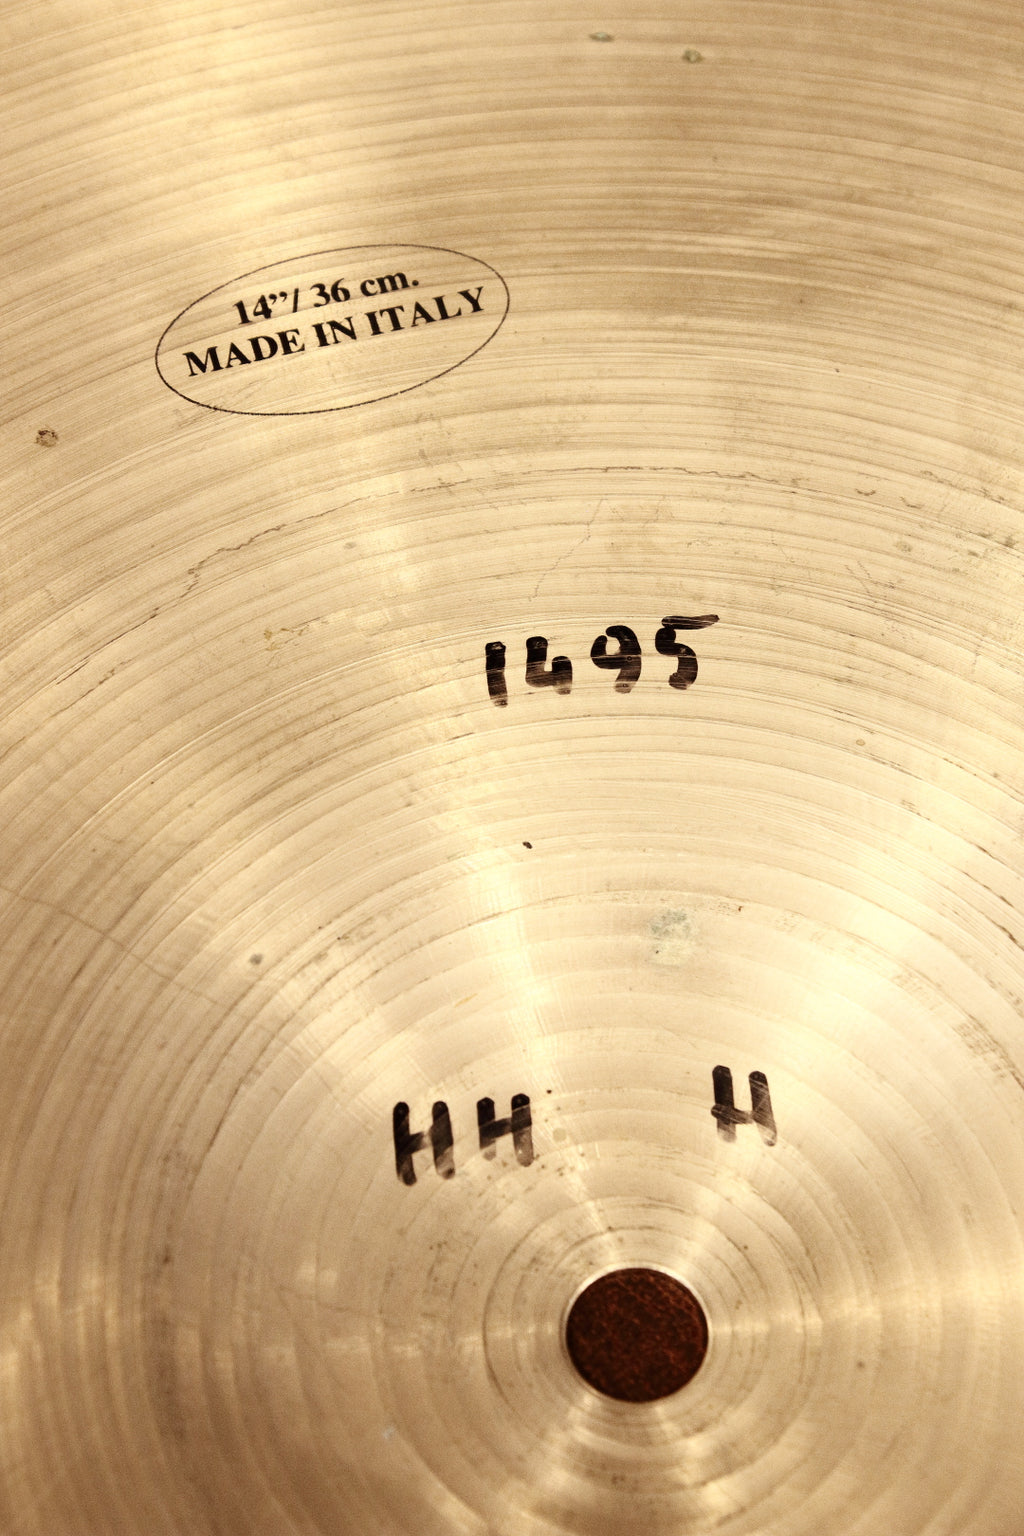 UFIP Class Series 14" Hi-Hats (Preowned)